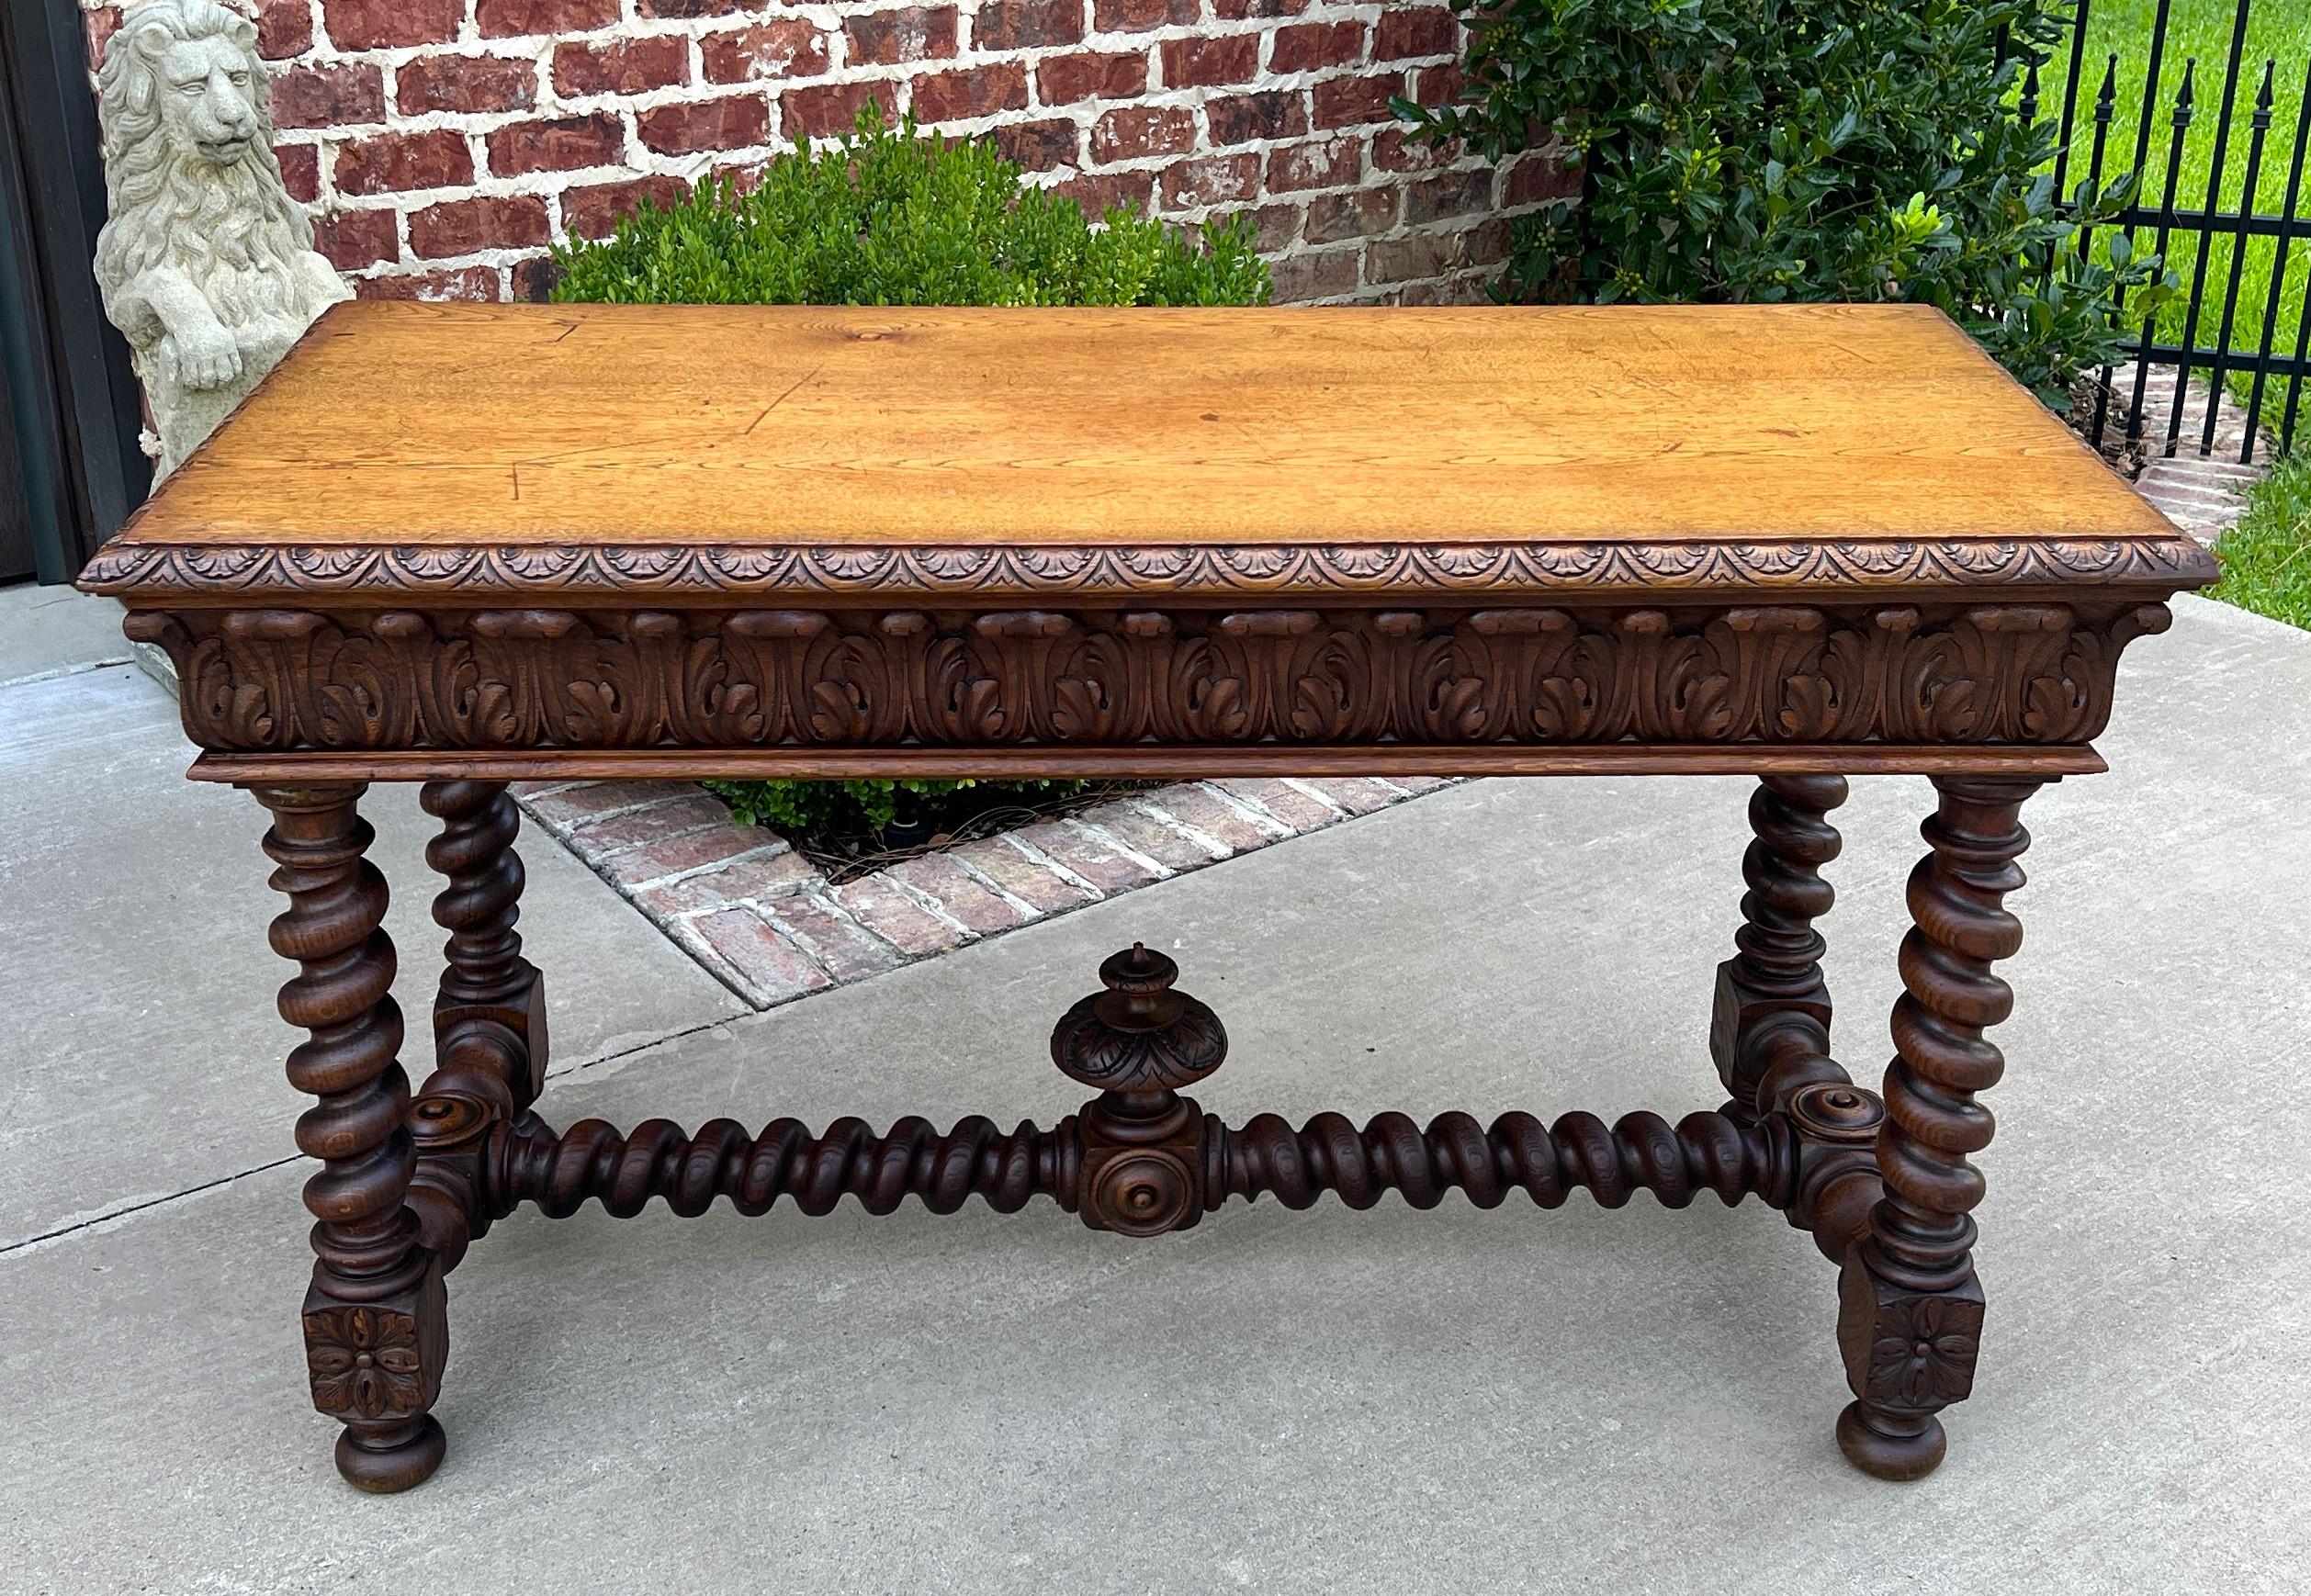 BEAUTIFUL  Antique French Honey Oak Renaissance Revival Library Office Writing Desk or Sofa/Entry Table with Barley Twist Legs and Stretcher
~~c. 1900s

With so many people working from home now, DESKS have become our most often requested items this